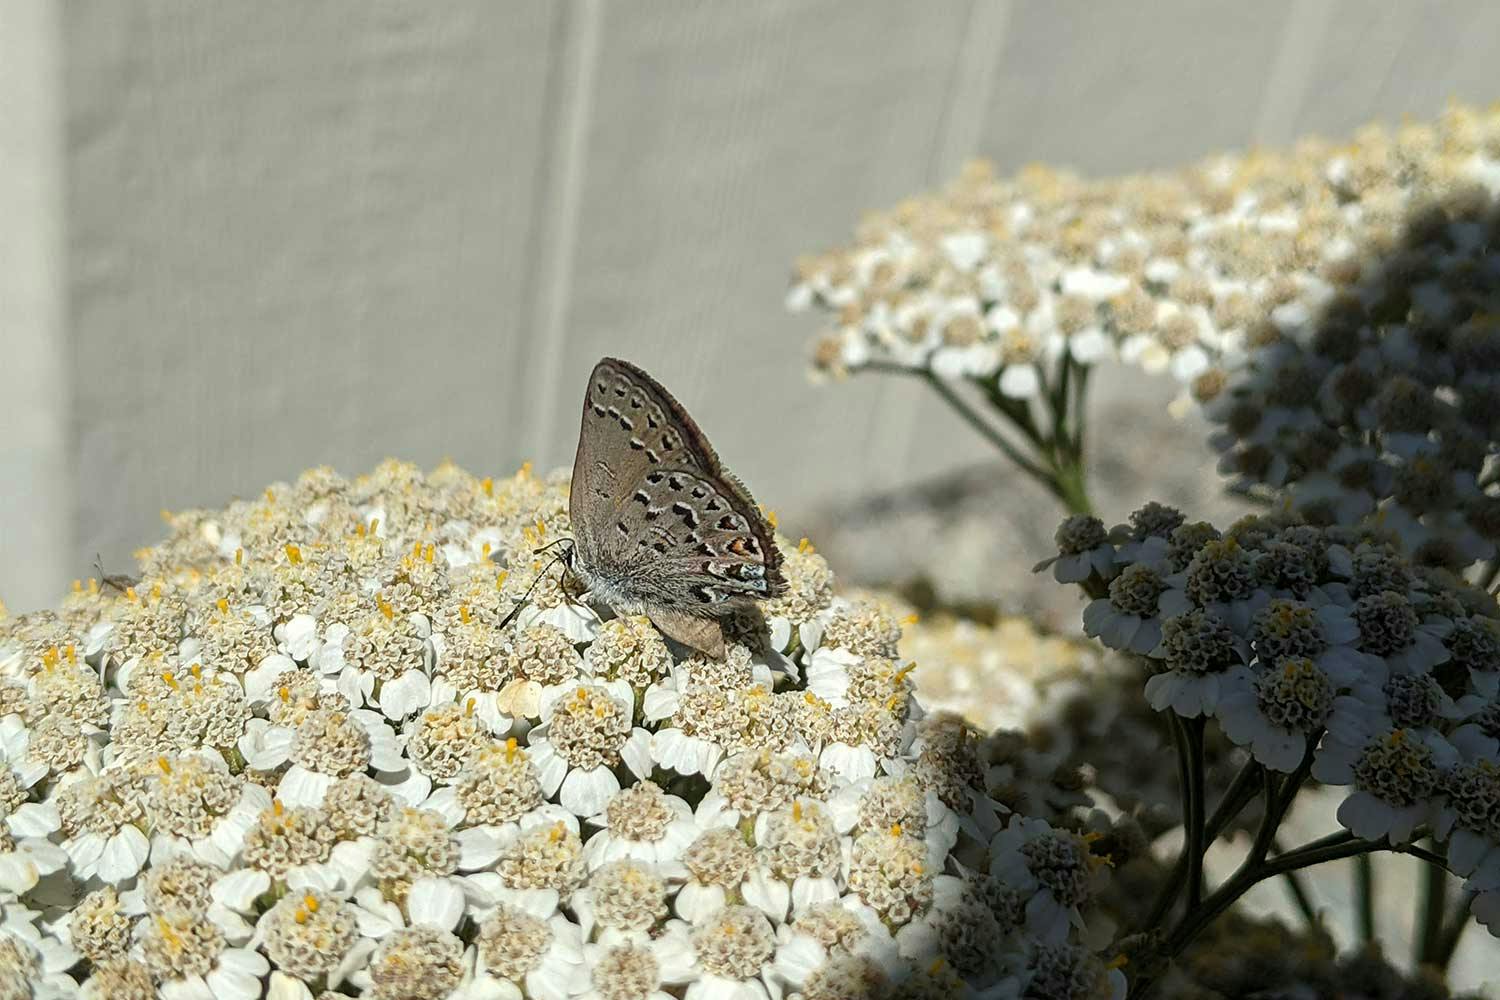 A fuzzy grey butterfly with black spots and black wingtips perches on a tight bunch of white flowers.